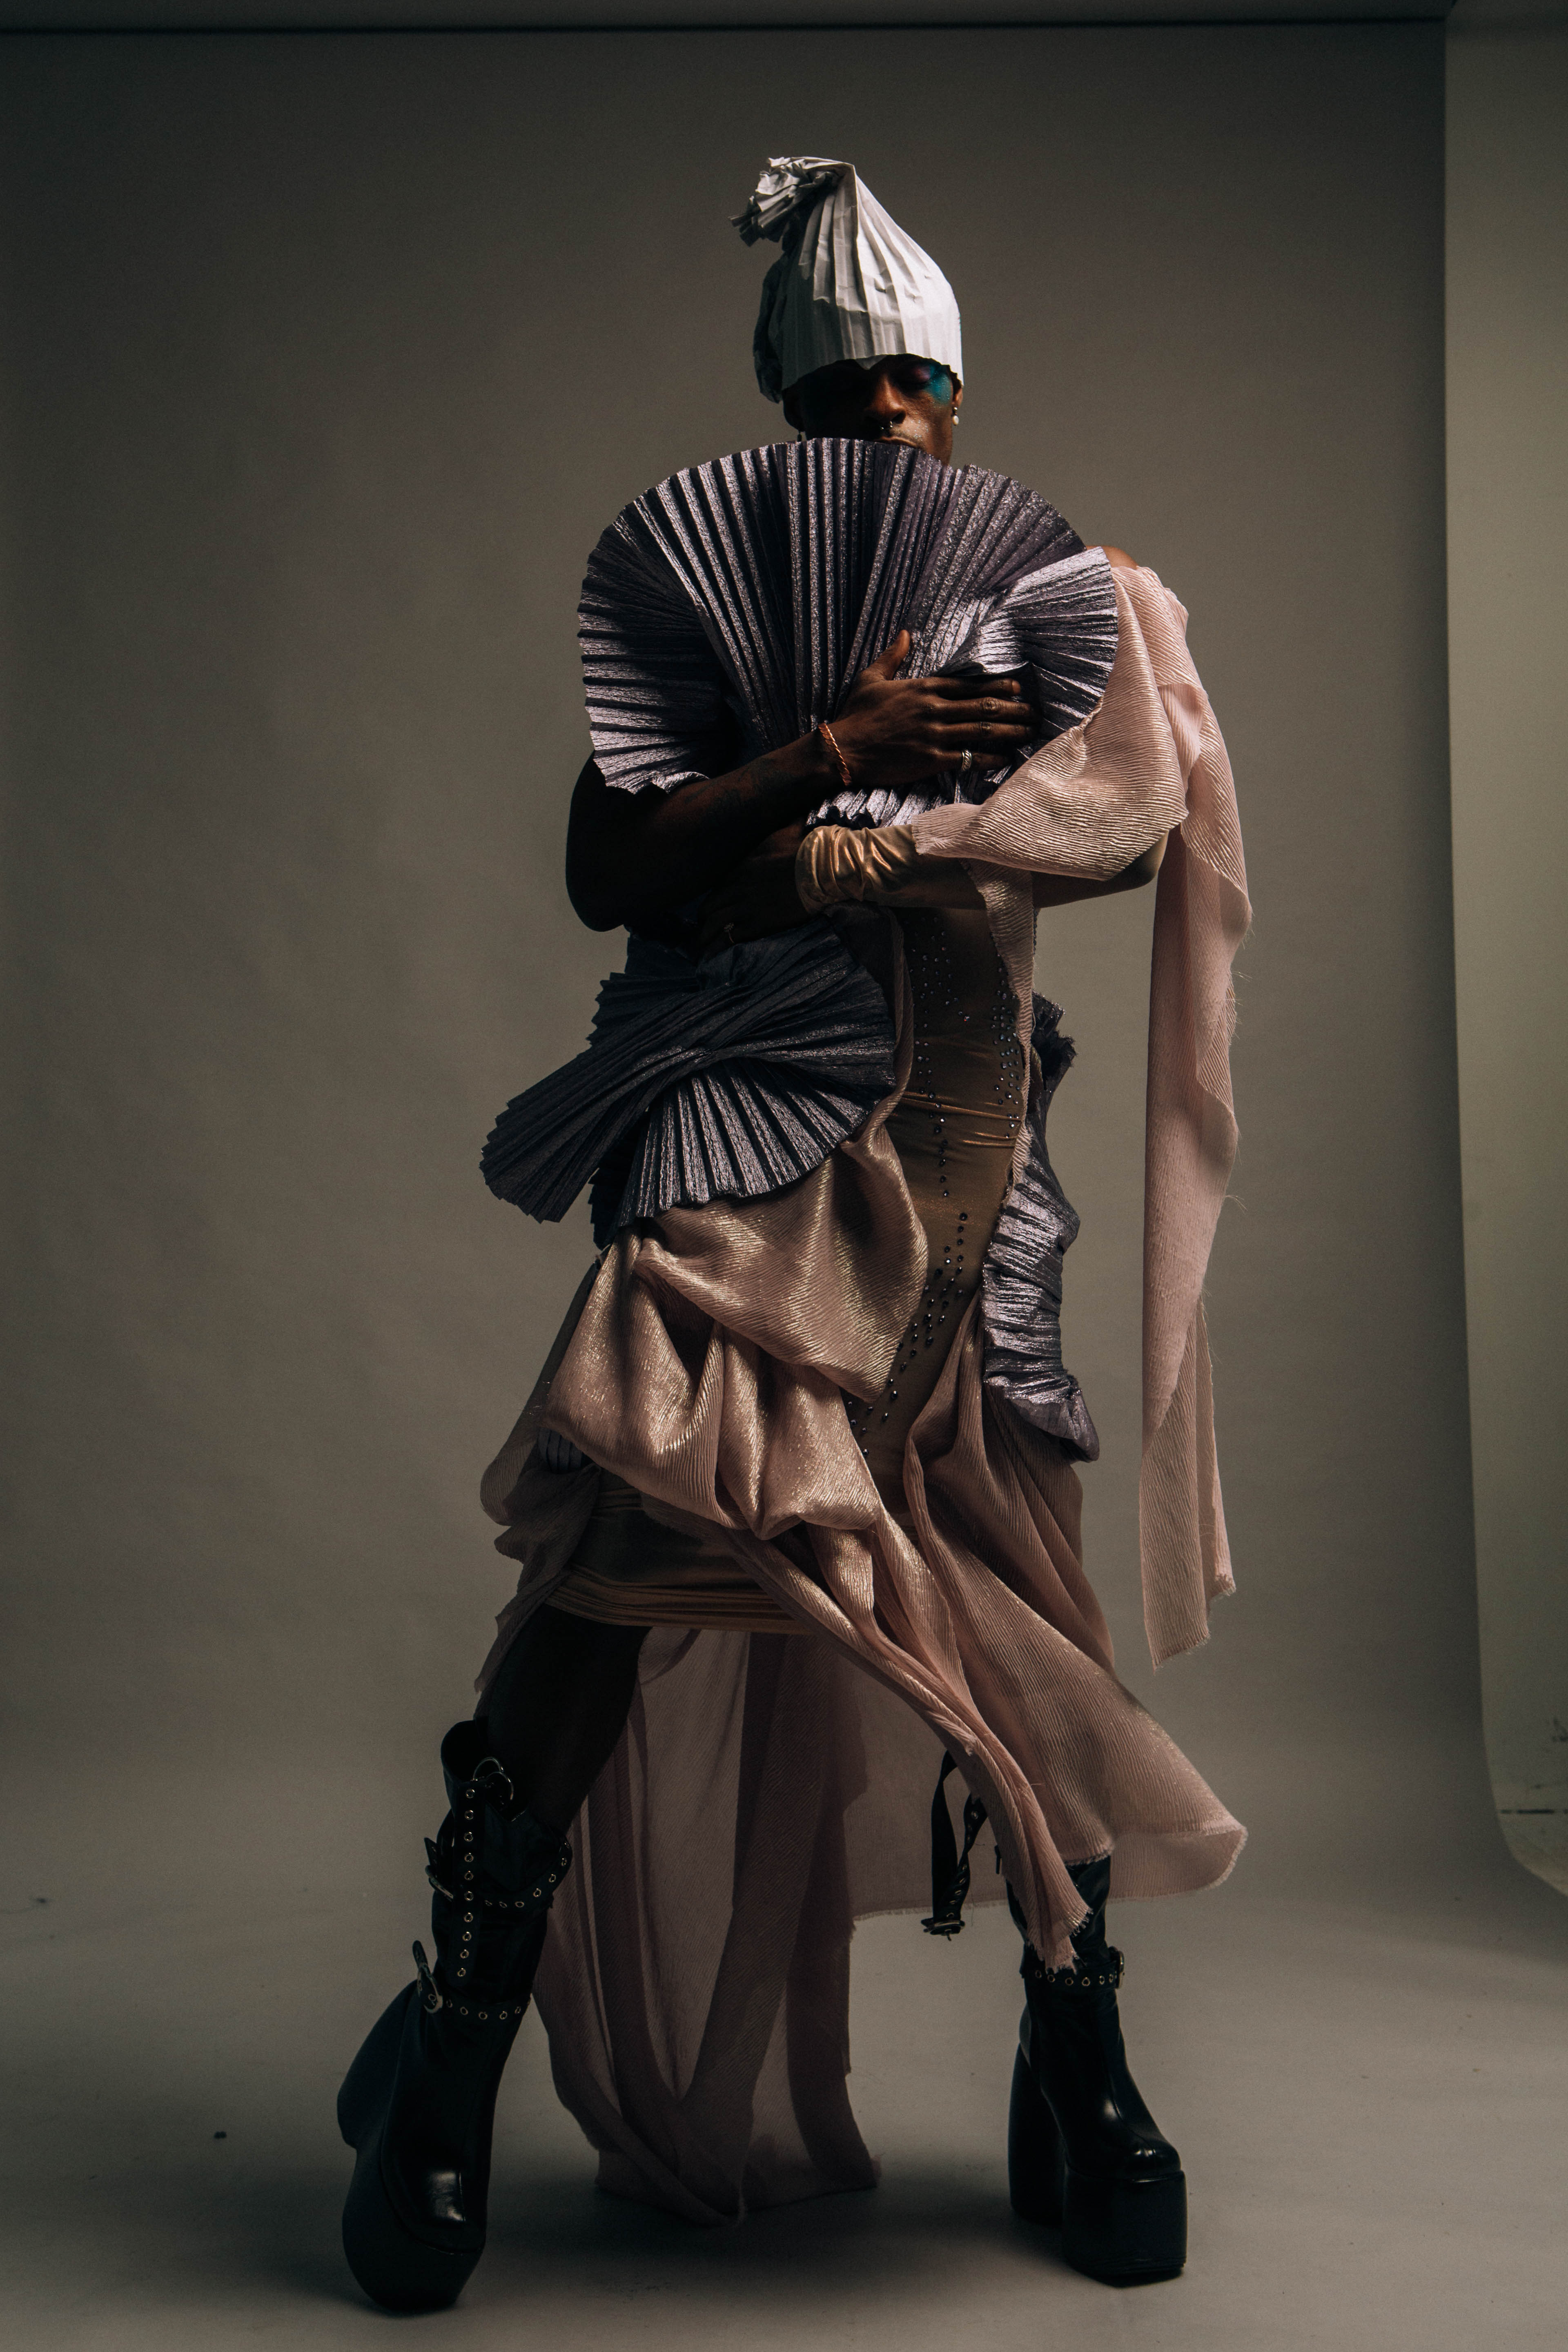 The same model and outfit from the previous photo is displayed in a different pose, showing another angle to the garment's draping; the model holds the chest-level purple pleated fabric like a fan. The background is dark grey.